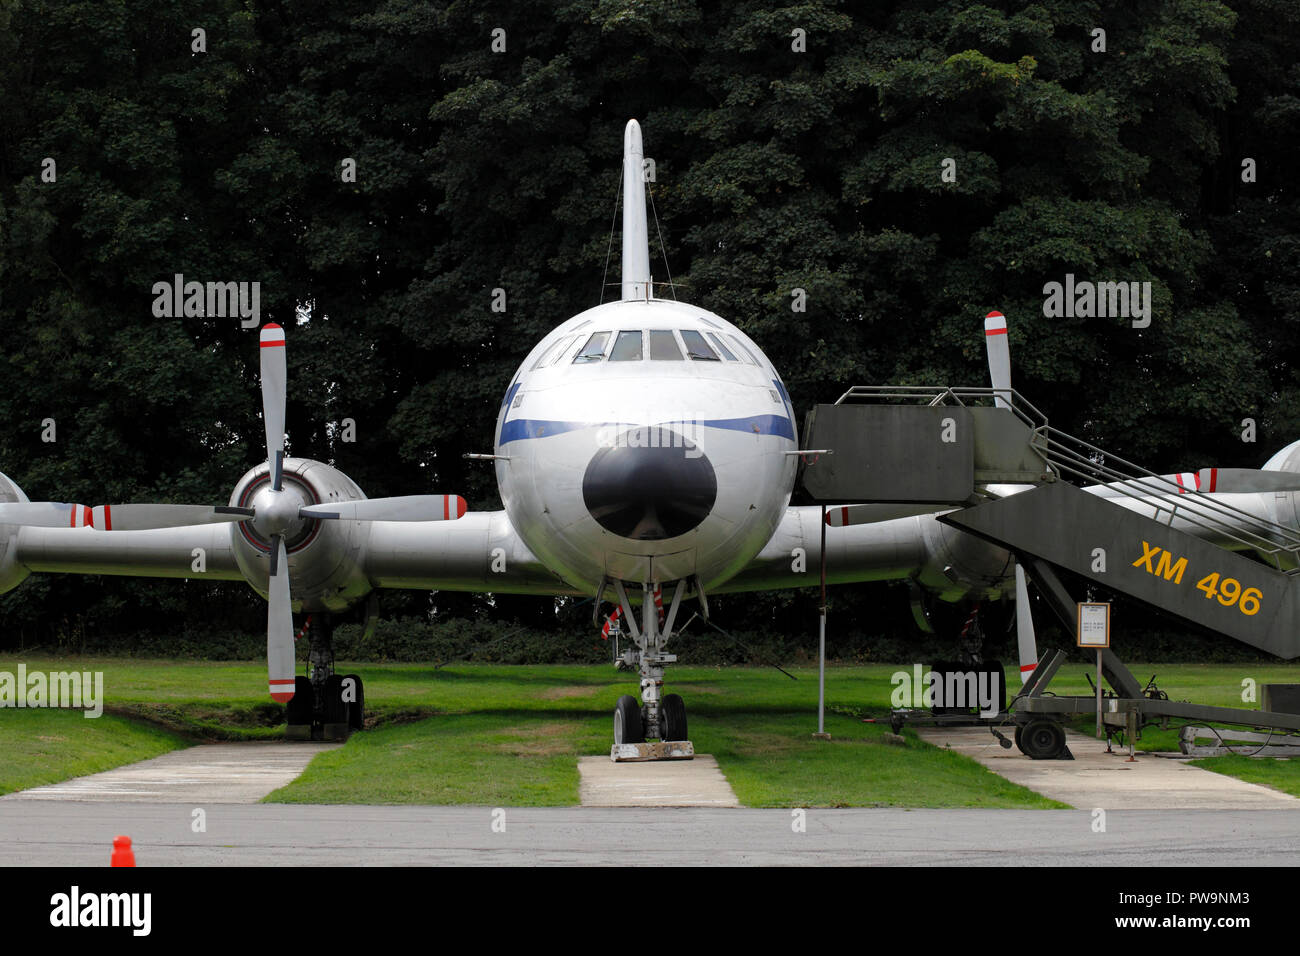 Bristol Brittania aircraft, static display at Kemble airfield. Known as the Whispering Giant. Stock Photo